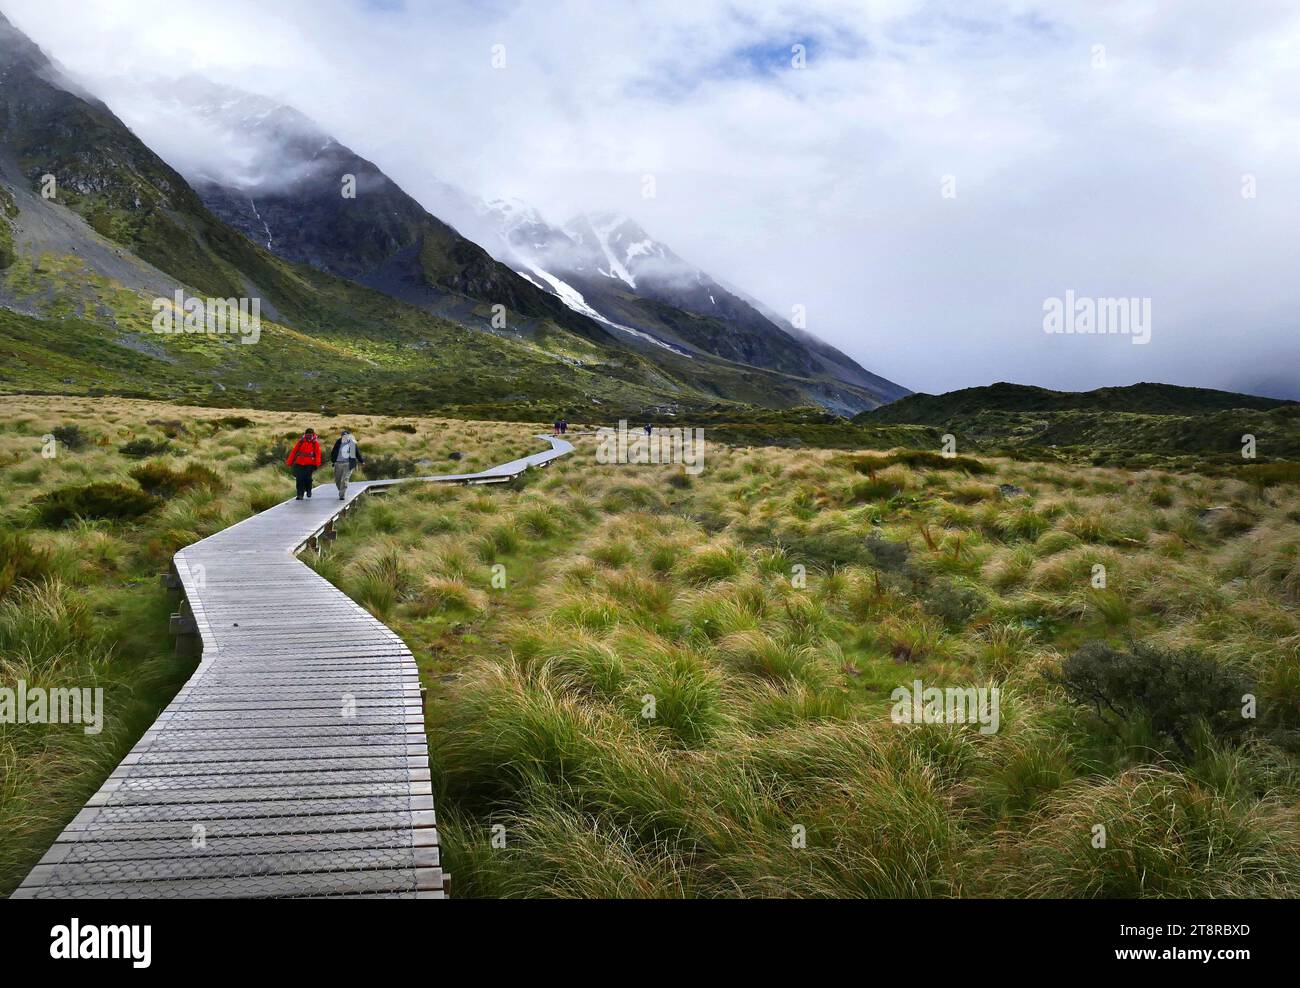 The broadwalk Hooker Valley. NZ, The Hooker Valley Track is the most popular short walking track within the Aoraki / Mount Cook National Park in New Zealand. At only 5 kilometres length and gaining only about 100 m in height, the well formed track can be walked by tourists with a wide range of level of fitness Stock Photo